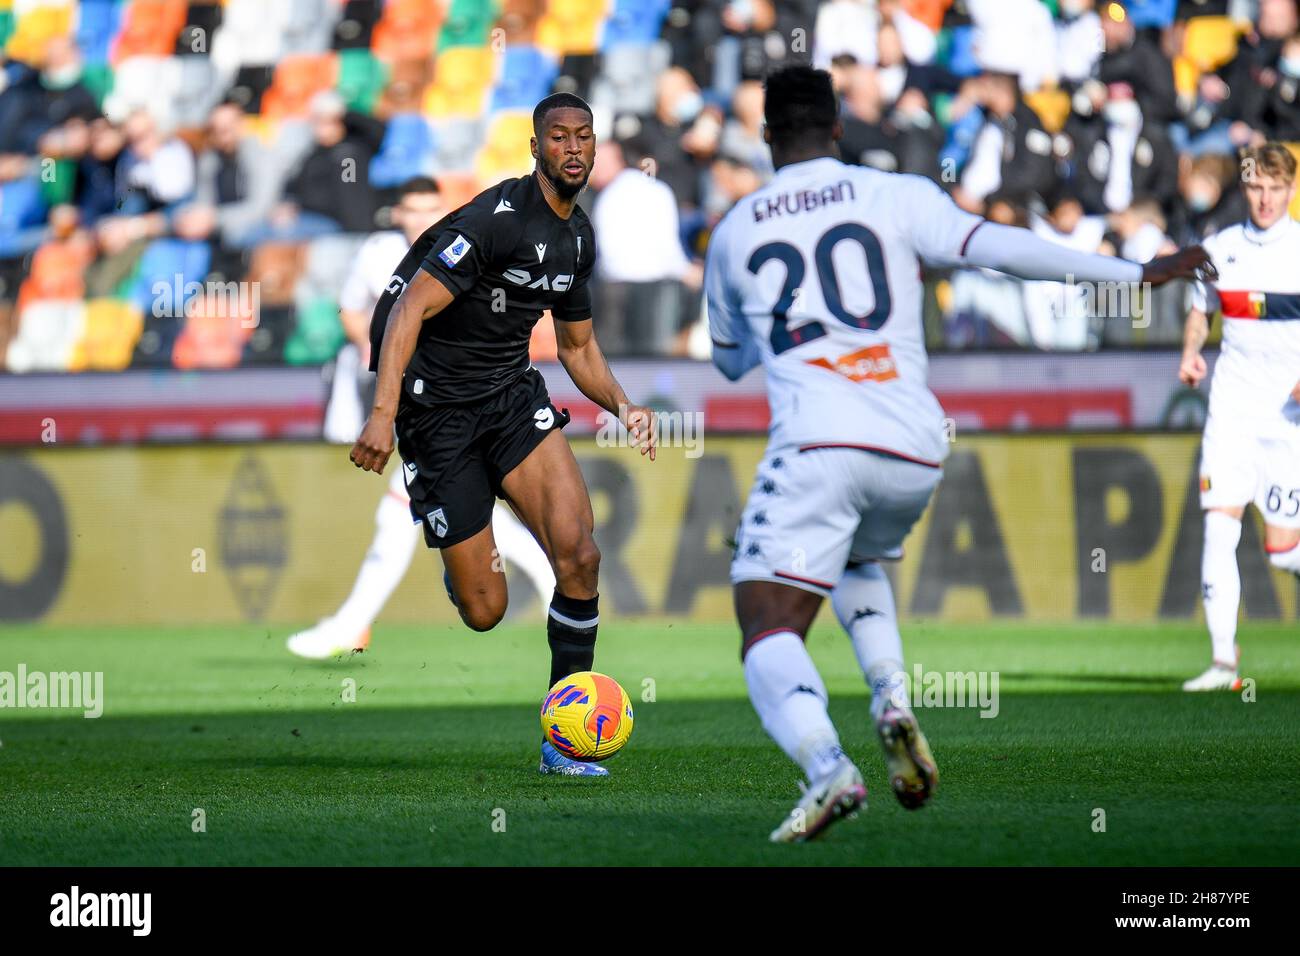 Udine, Italy. 28th Nov, 2021. Norberto Bercique Gomes Betuncal (Udinese) carries the ball during Udinese Calcio vs Genoa CFC, italian soccer Serie A match in Udine, Italy, November 28 2021 Credit: Independent Photo Agency/Alamy Live News Stock Photo